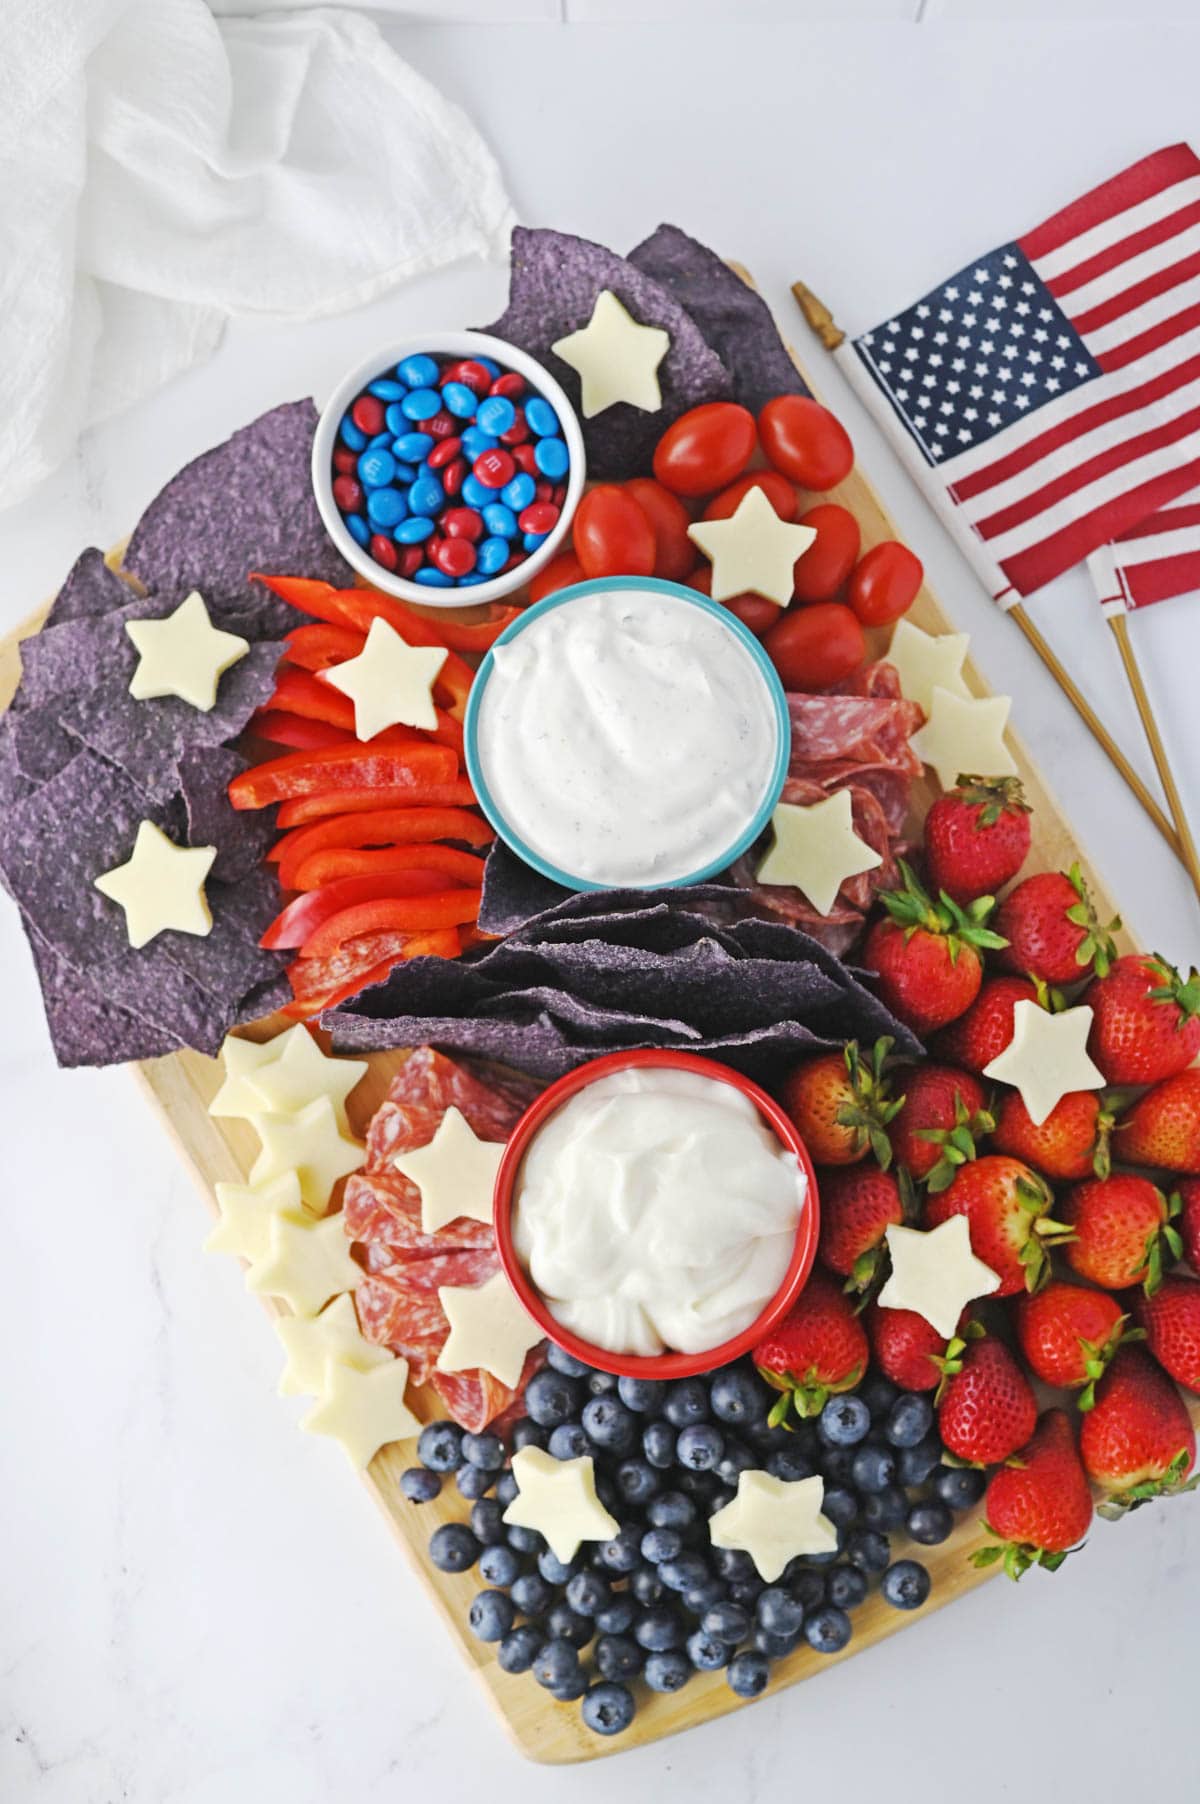 Charcuterie board filled in with red, white and blue food